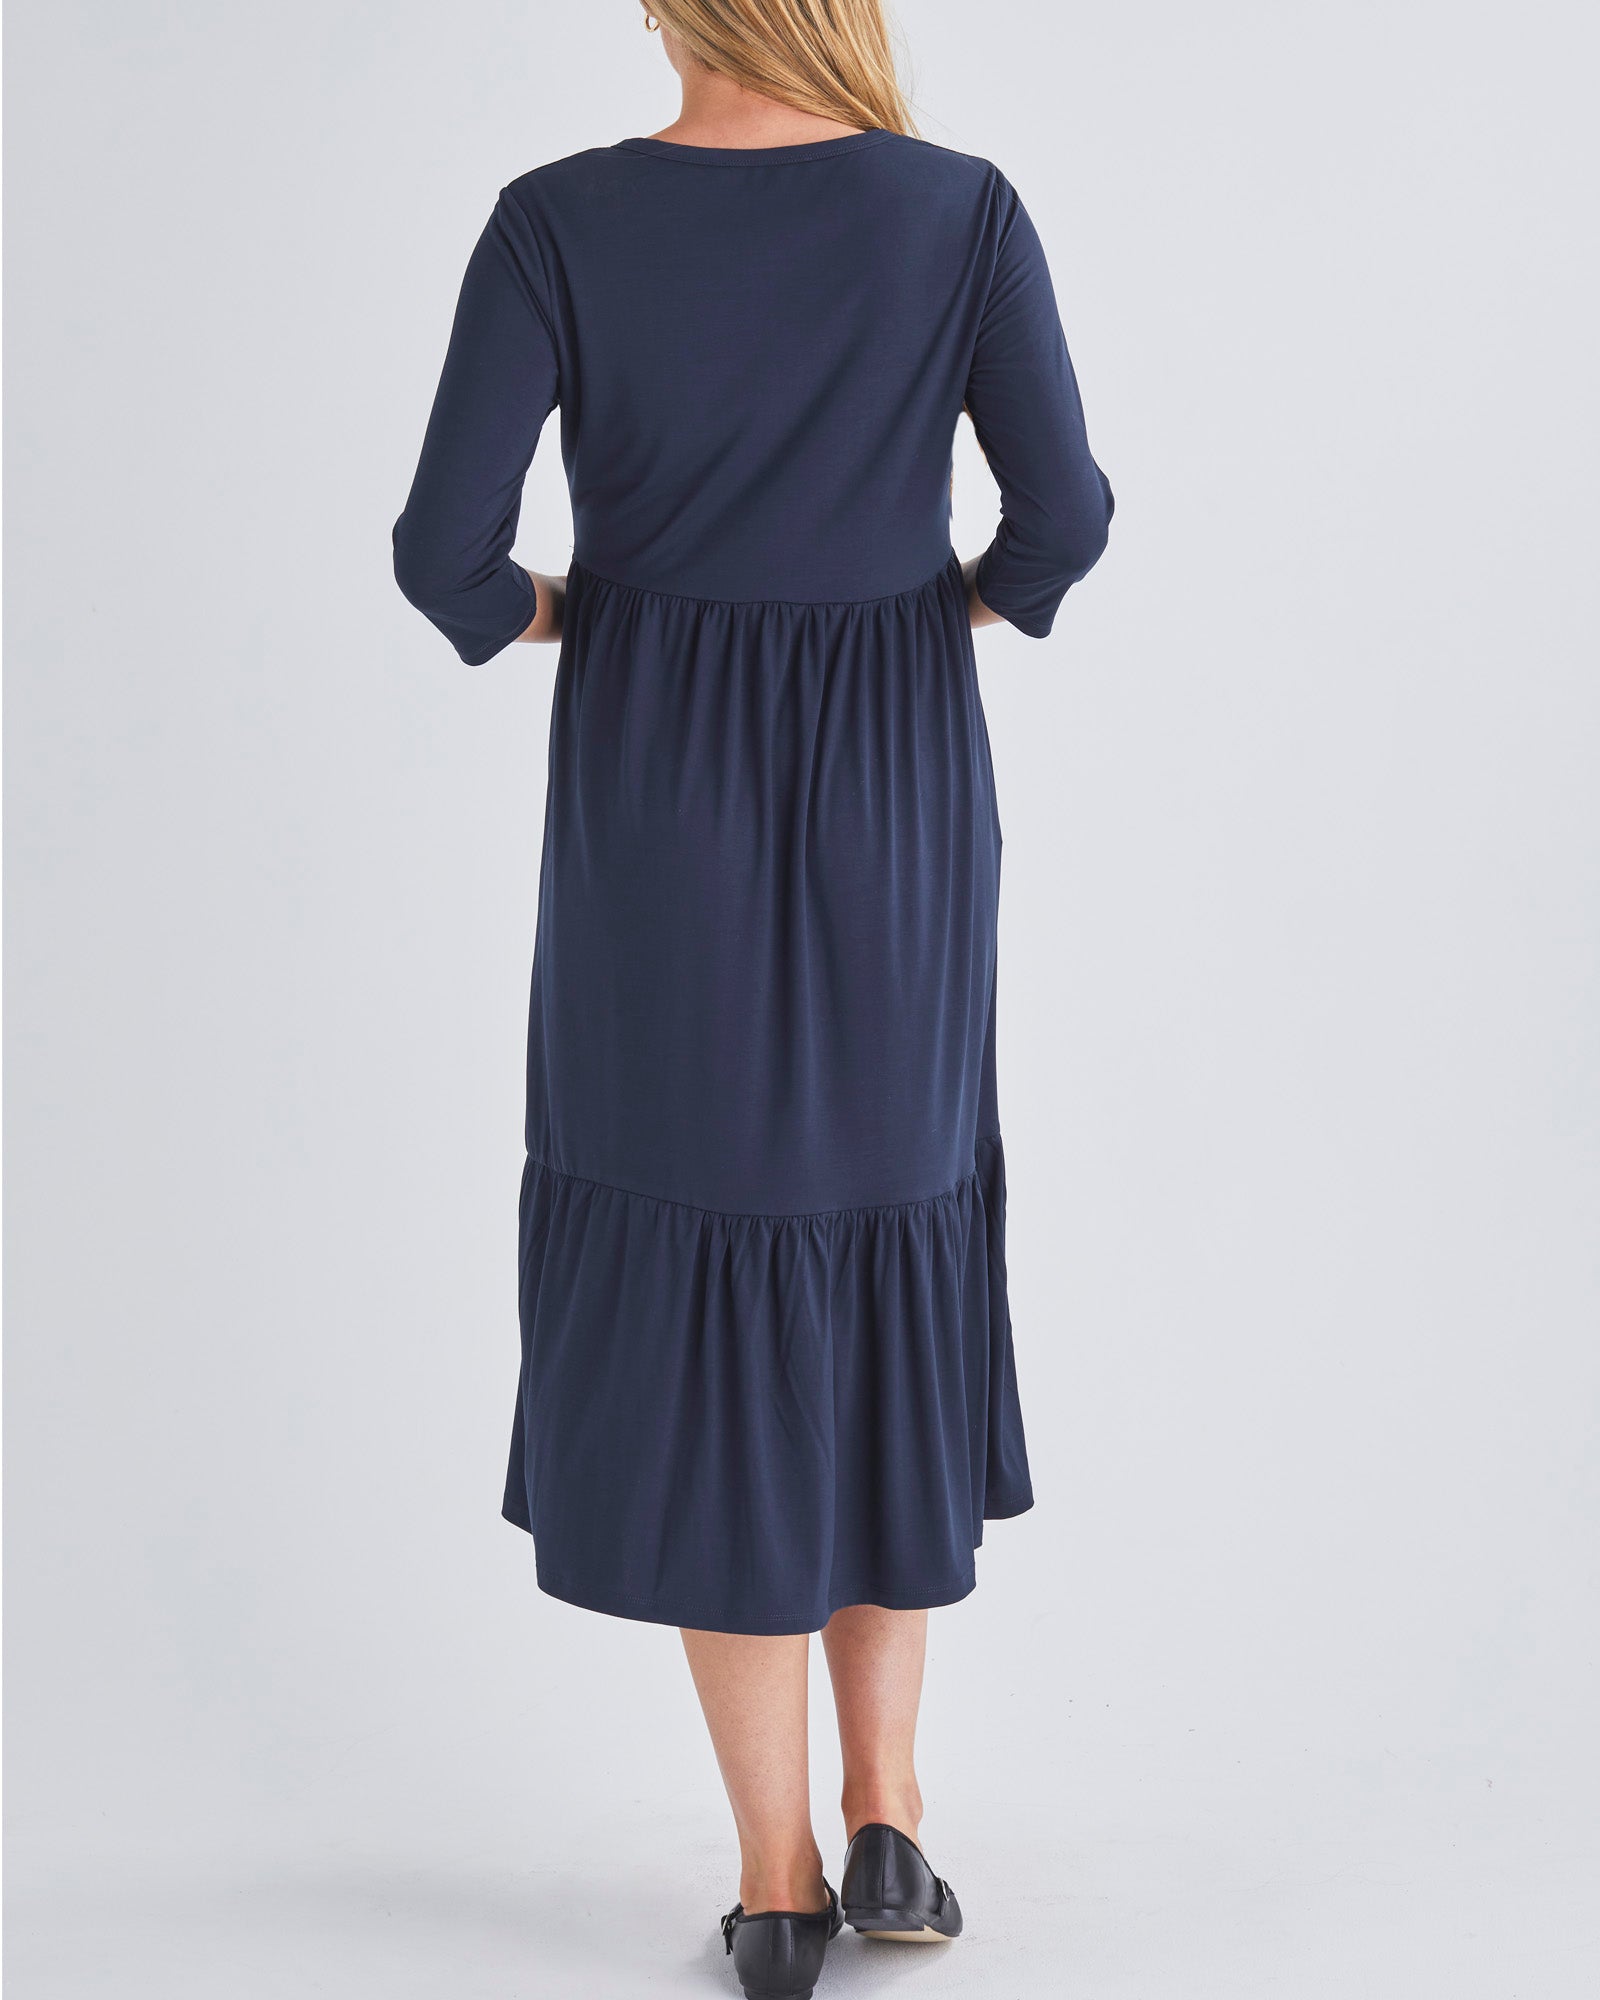 Back View - A Pregnant Woment Wearing Tiered Maternity Midi Dress in Navy from Angel Maternity Australia